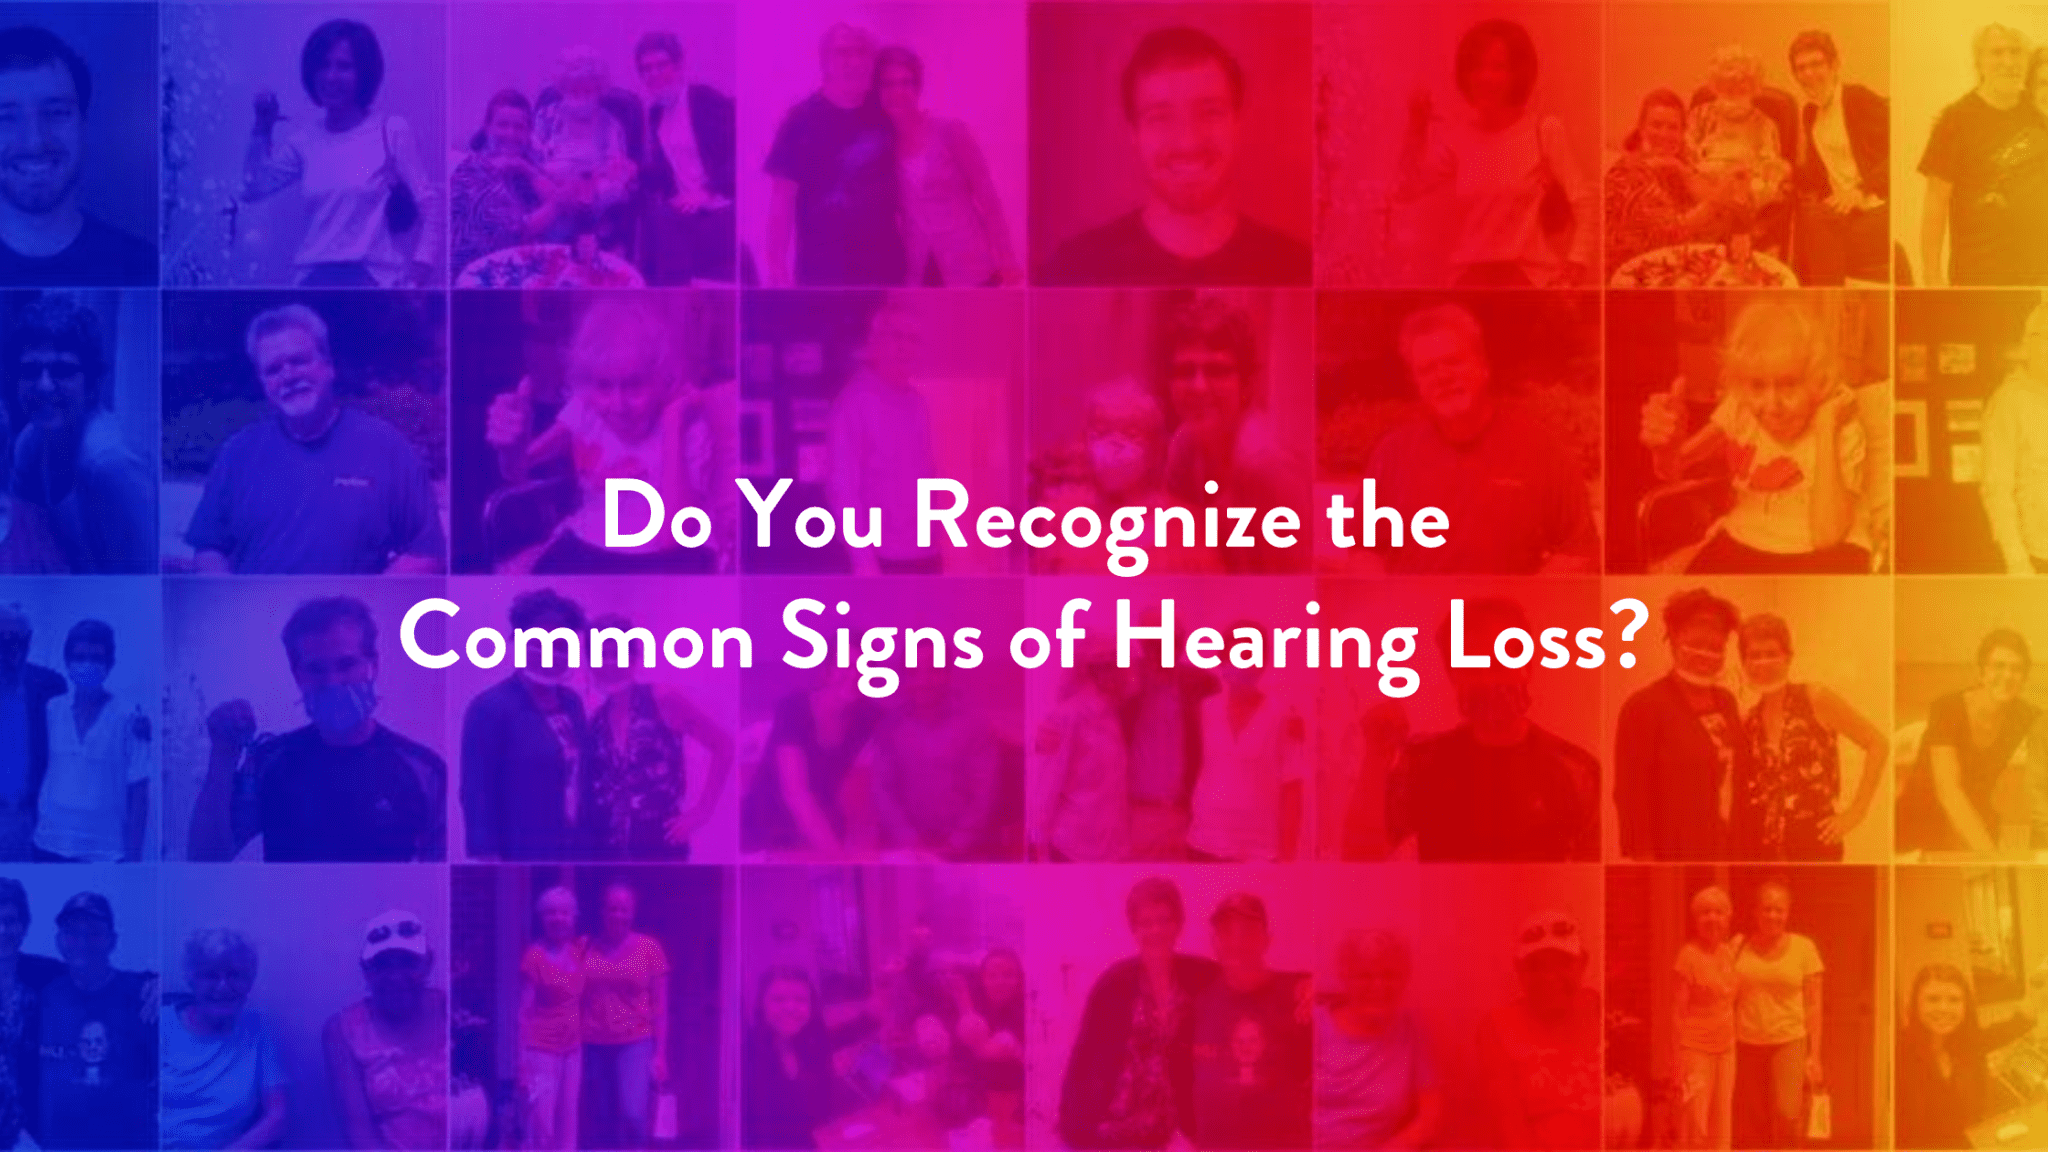 Do You Recognize the Common Signs of Hearing Loss?